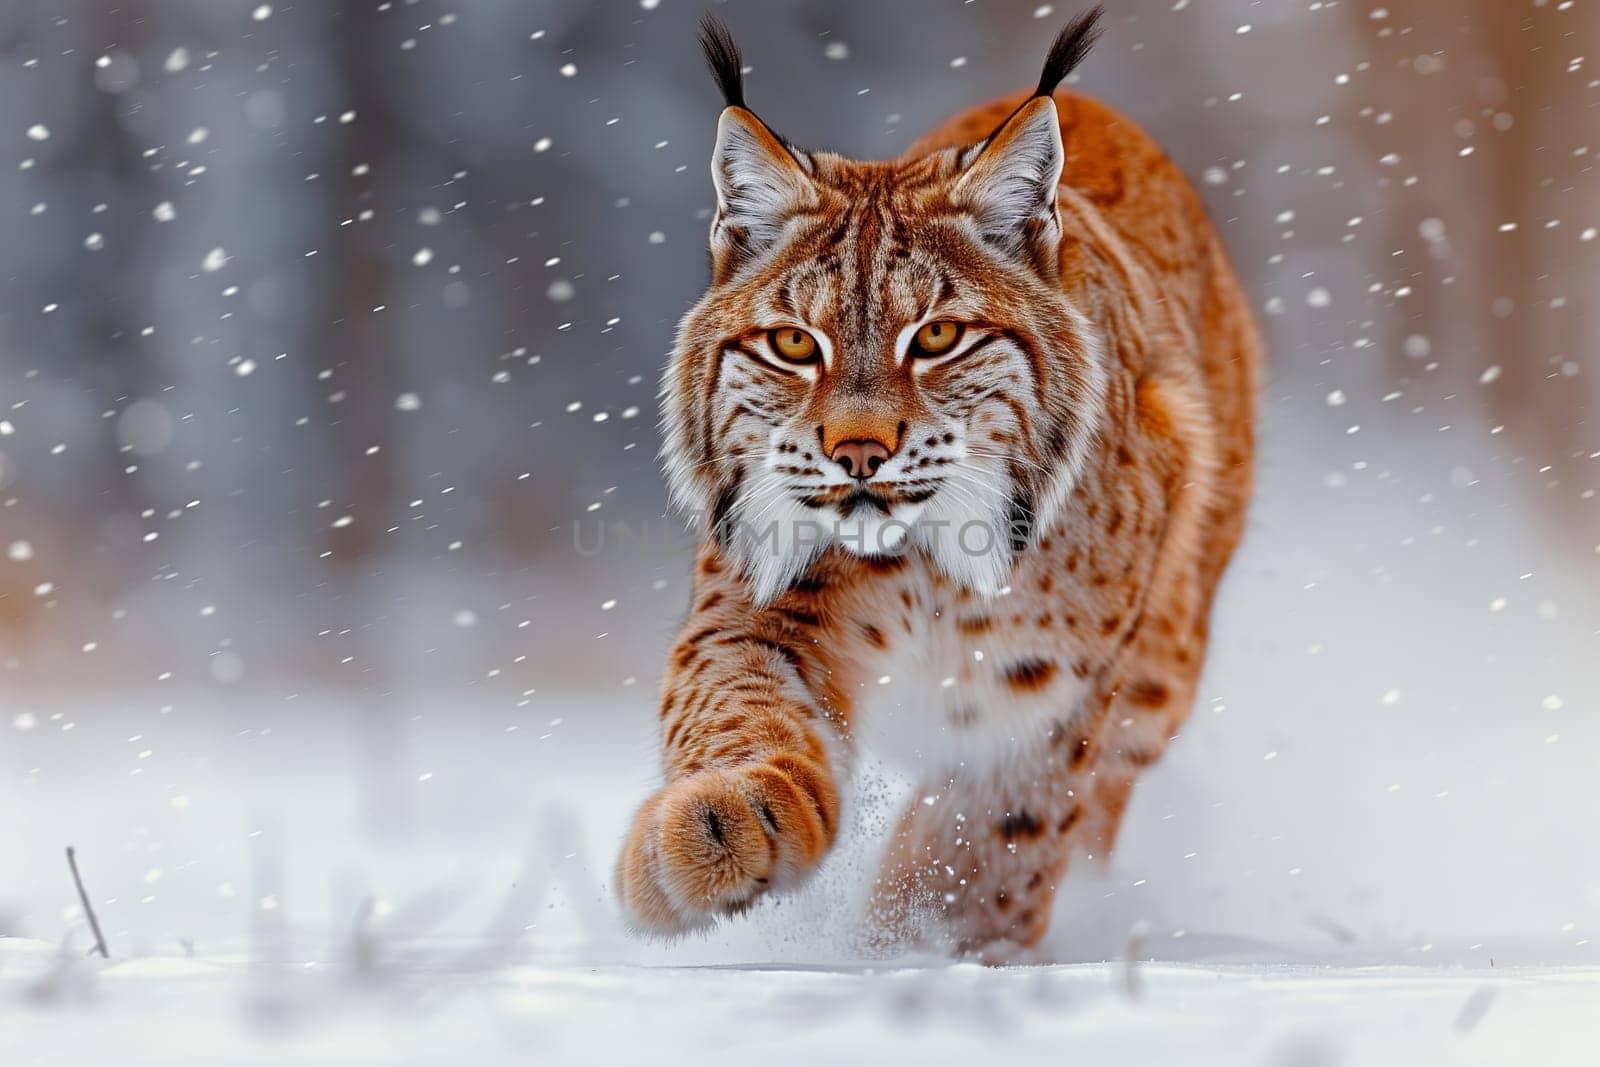 A small to mediumsized Felidae, the lynx, a carnivore with whiskers and a snout, is running through the snowcovered woods, adapted as a terrestrial animal hunting for prey like fawn